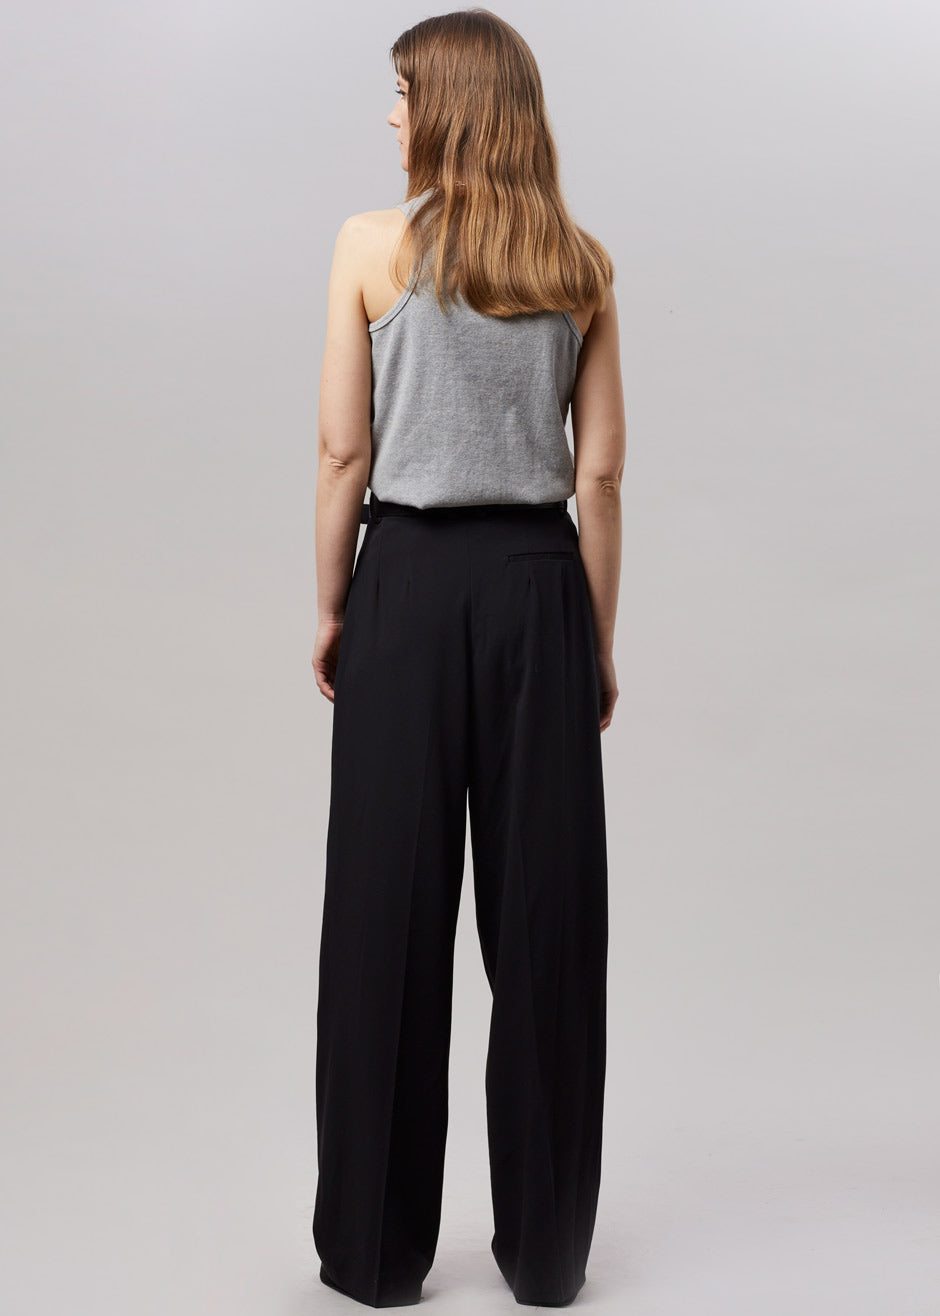 Tansy Pleated Trousers - Black - 12